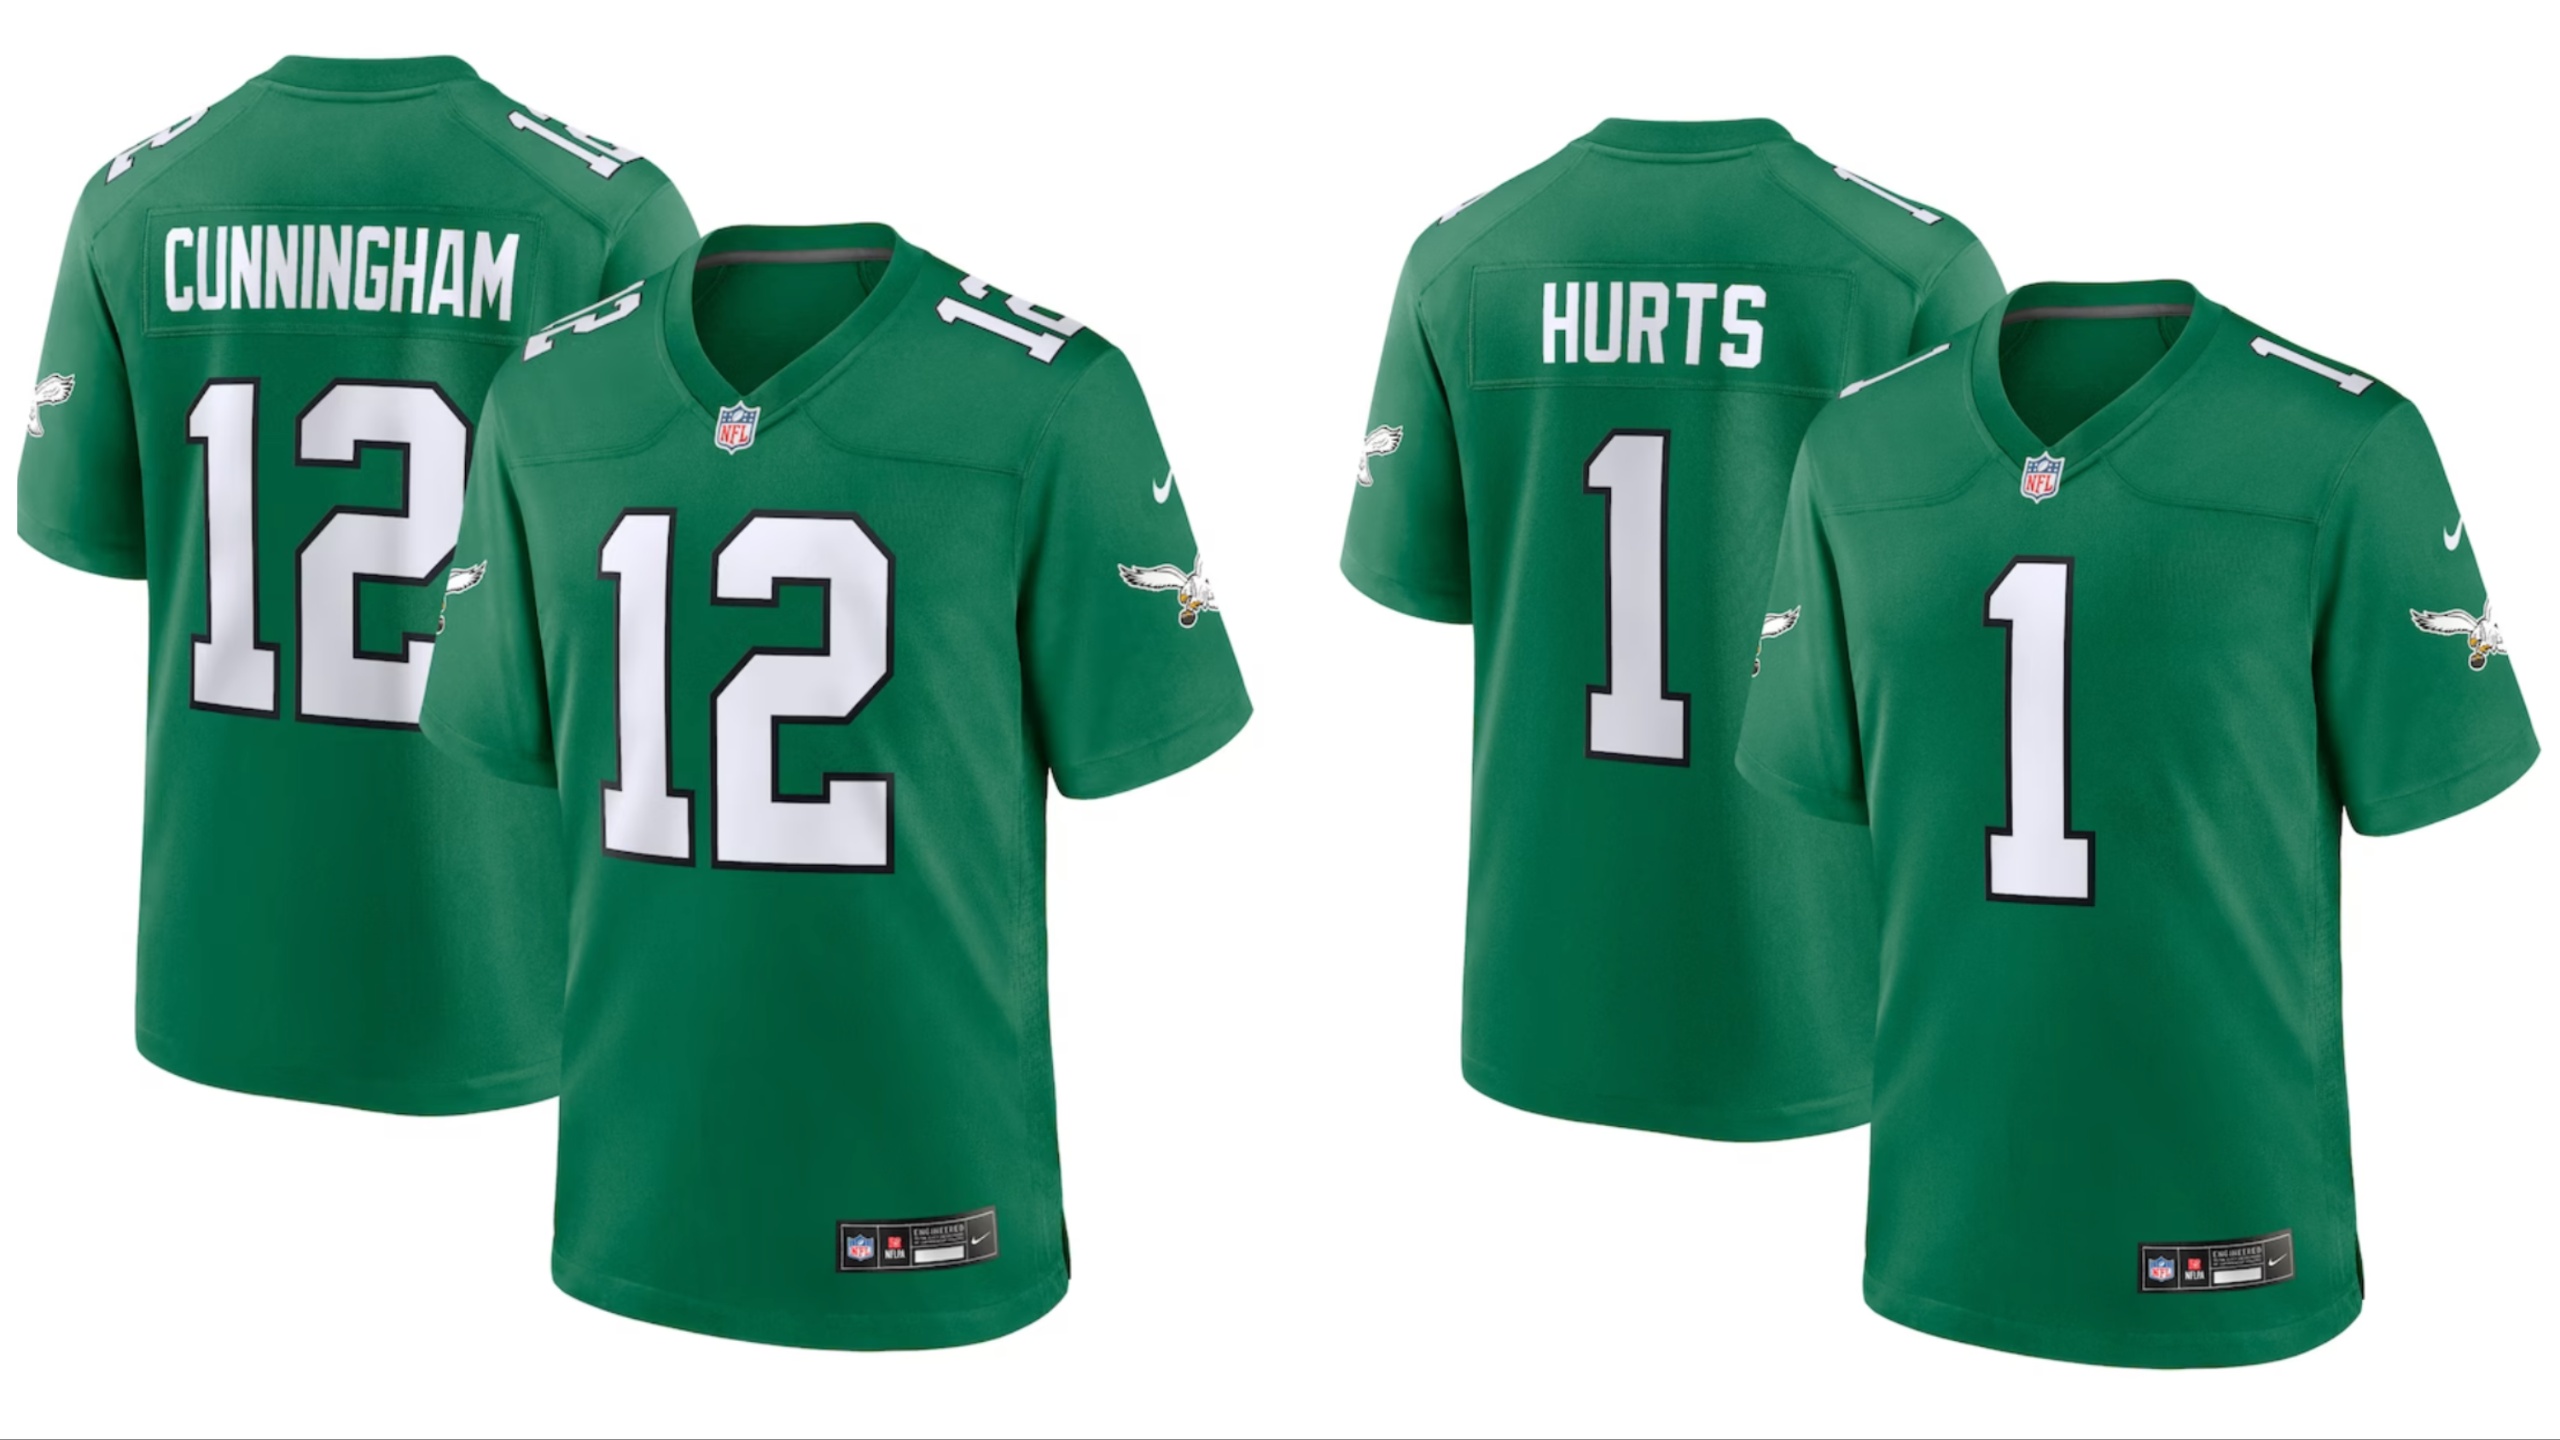 Where to get the new Philadelphia Eagles kelly green throwback